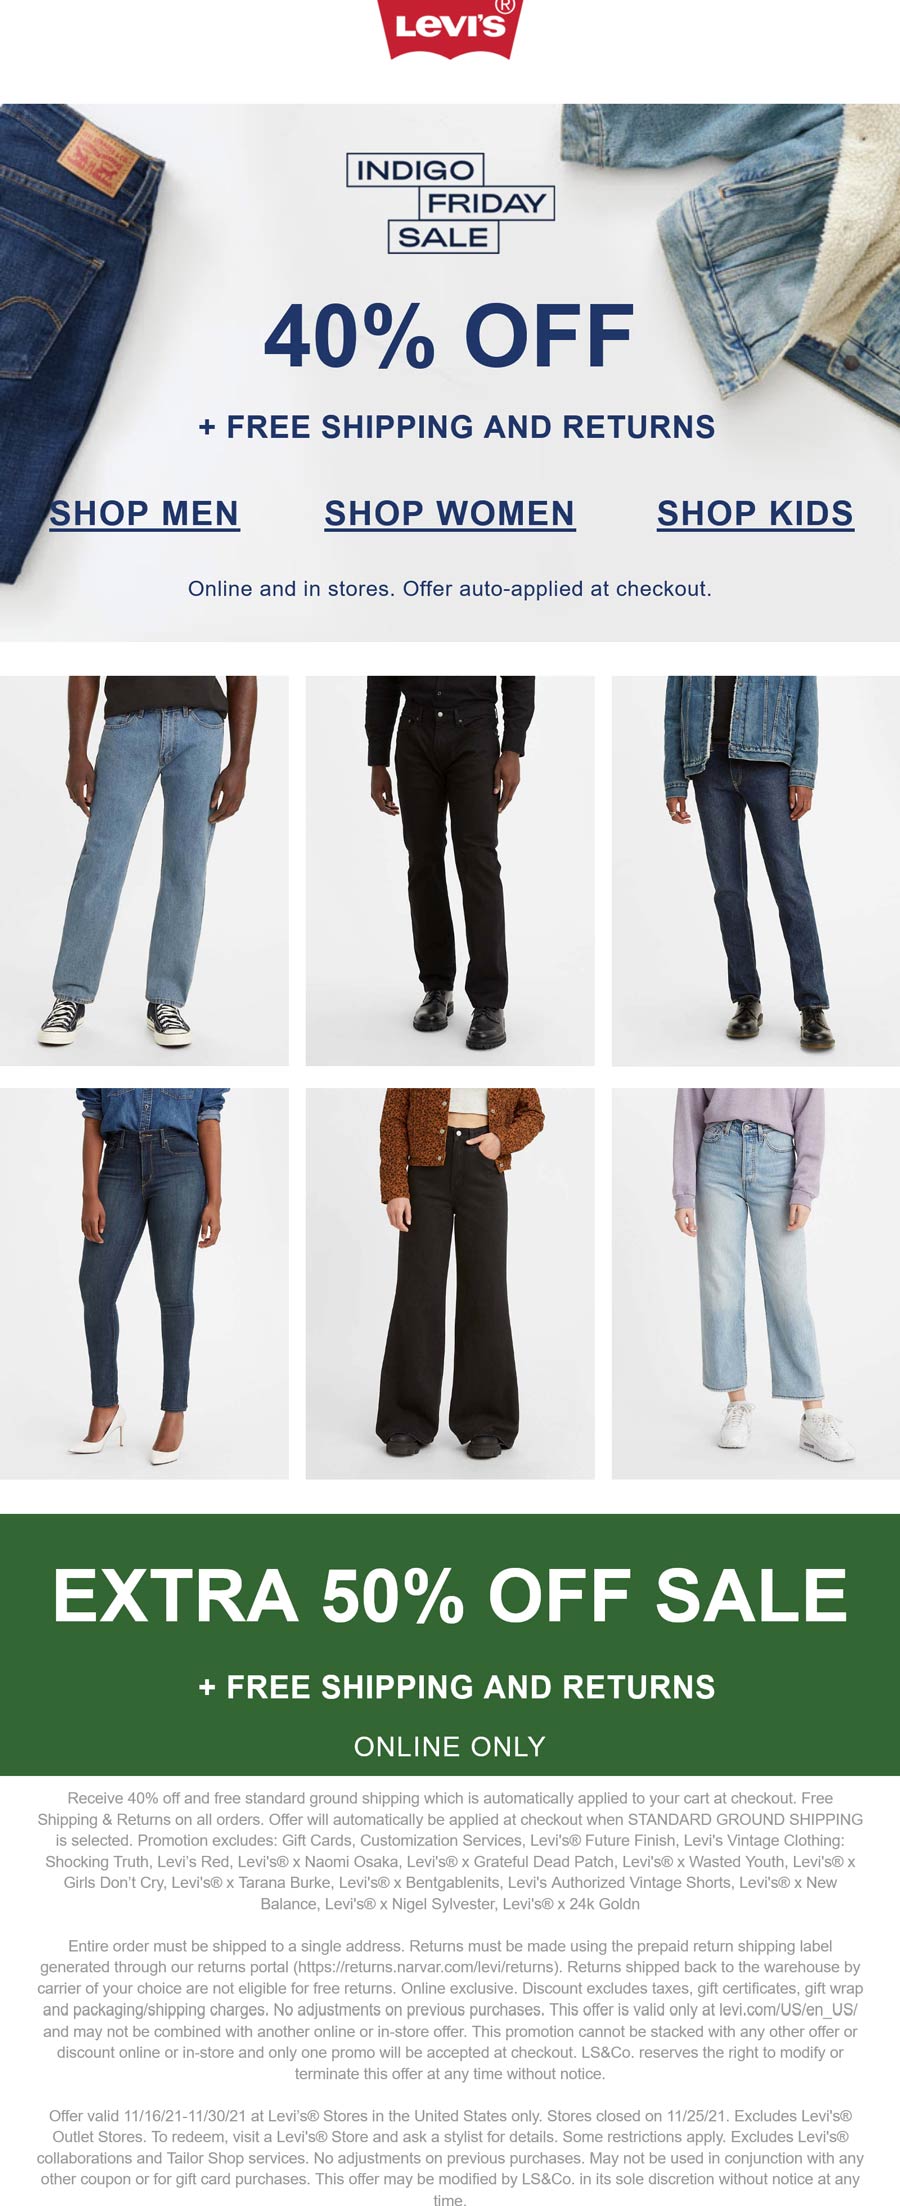 Levis coupons & promo code for [January 2022]